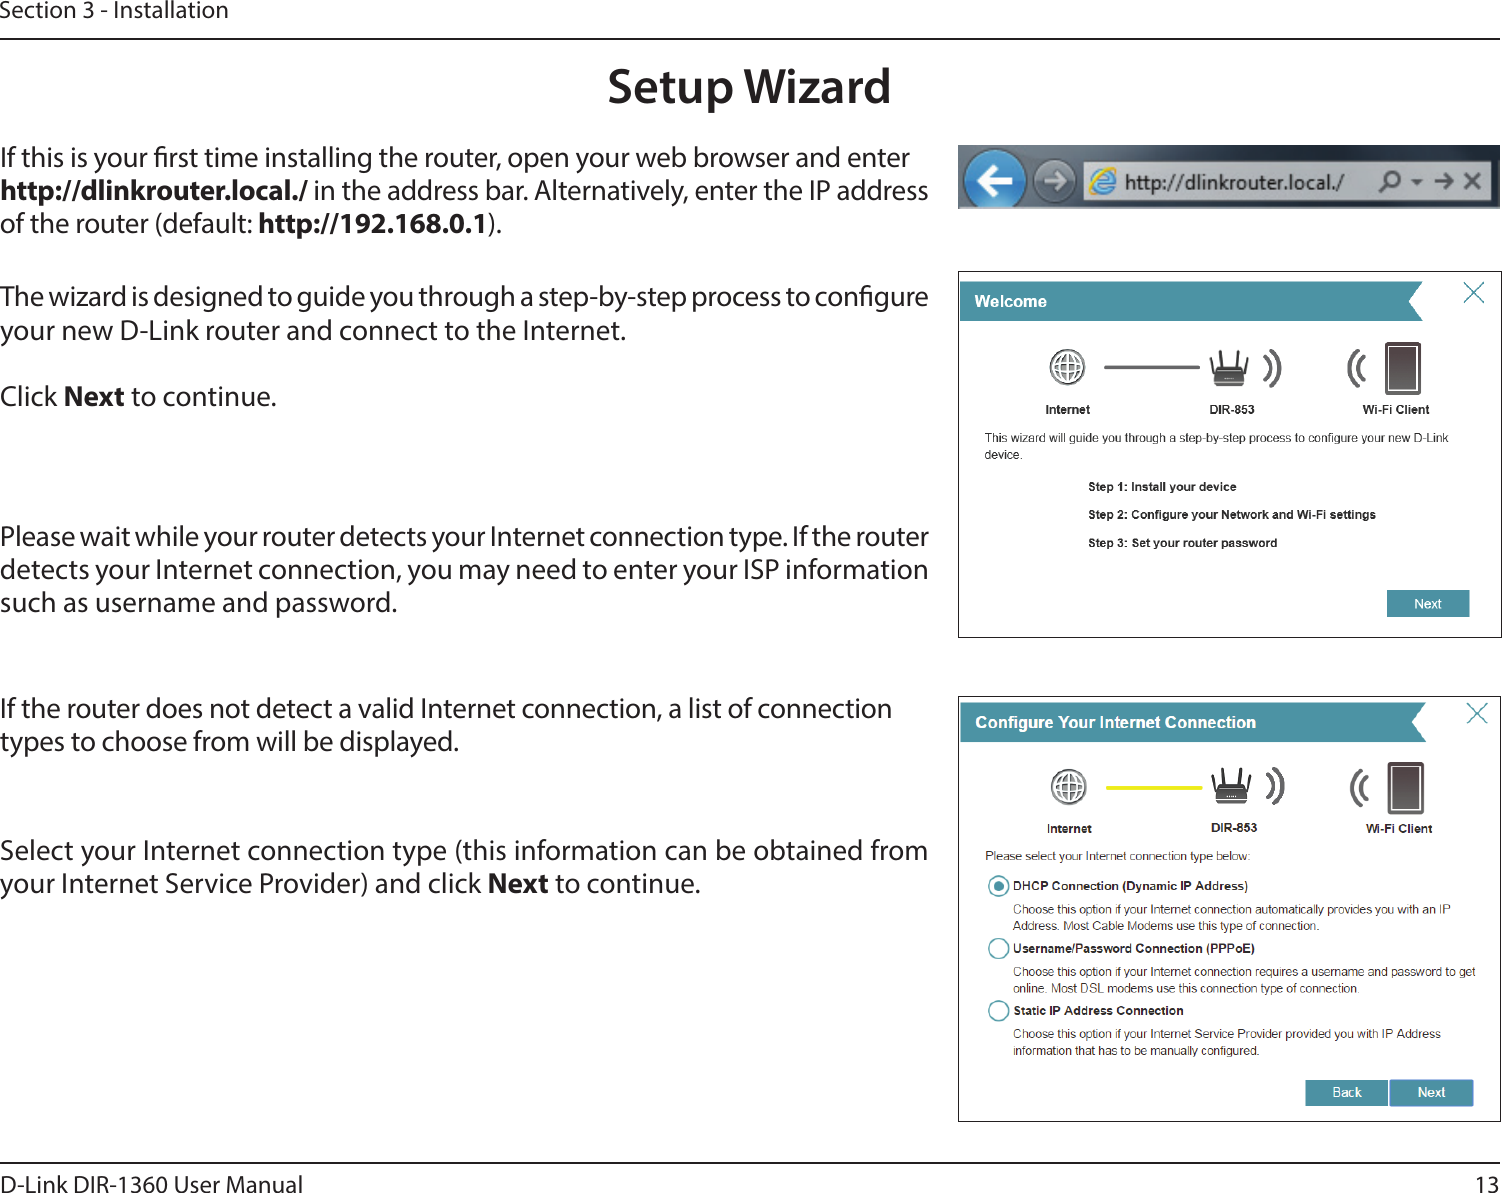 13D-Link DIR-1360 User ManualSection 3 - InstallationThe wizard is designed to guide you through a step-by-step process to congure your new D-Link router and connect to the Internet.Click Next to continue. Setup WizardIf this is your rst time installing the router, open your web browser and enter http://dlinkrouter.local./ in the address bar. Alternatively, enter the IP address of the router (default: http://192.168.0.1). Please wait while your router detects your Internet connection type. If the router detects your Internet connection, you may need to enter your ISP information such as username and password.If the router does not detect a valid Internet connection, a list of connection types to choose from will be displayed.Select your Internet connection type (this information can be obtained from your Internet Service Provider) and click Next to continue.